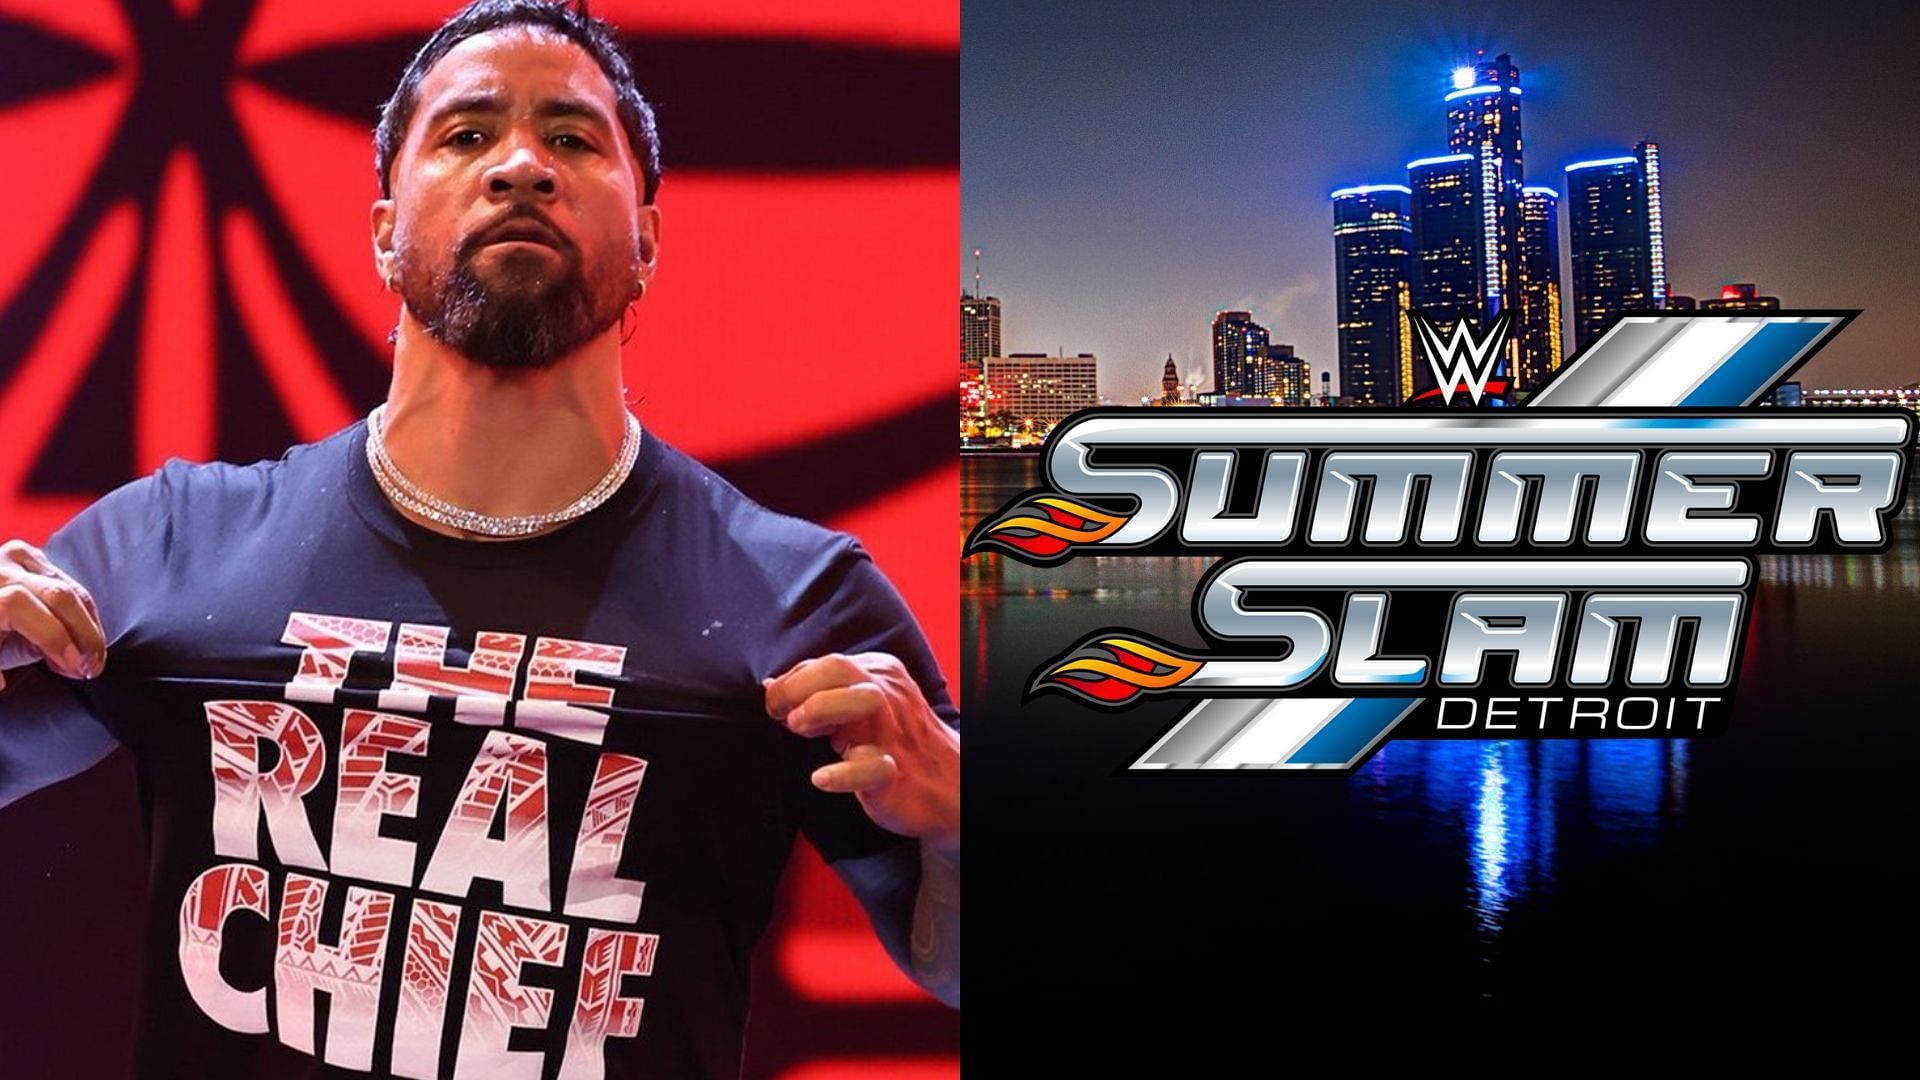 Jey Uso has the biggest match of his career at SummerSlam.